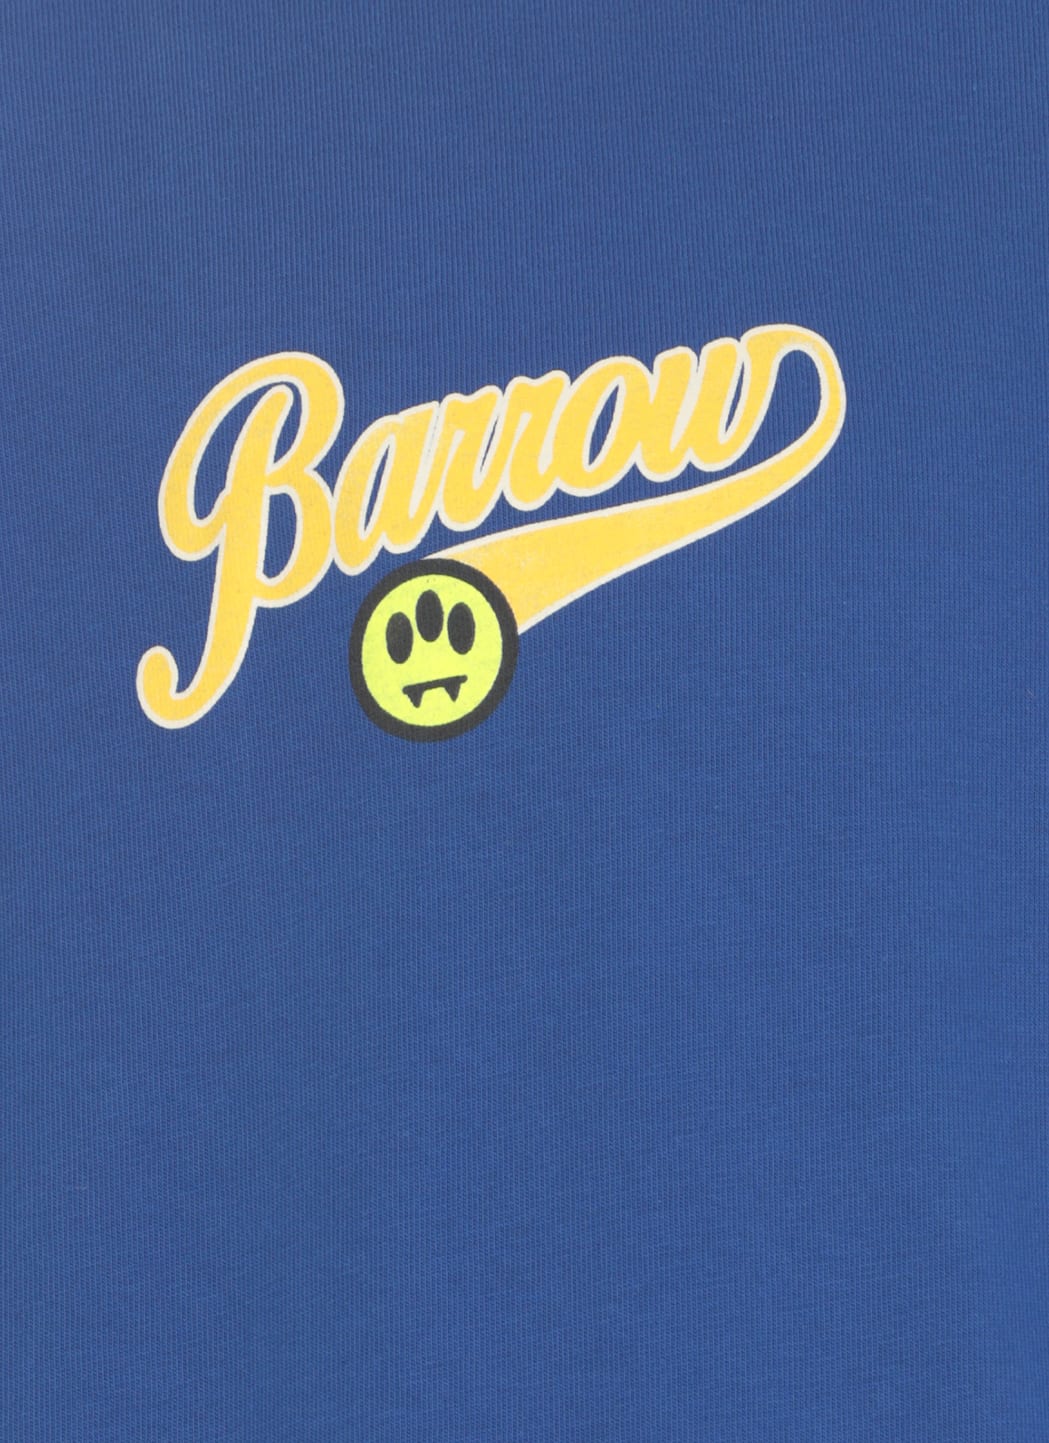 Shop Barrow T-shirt With Logo In Blue